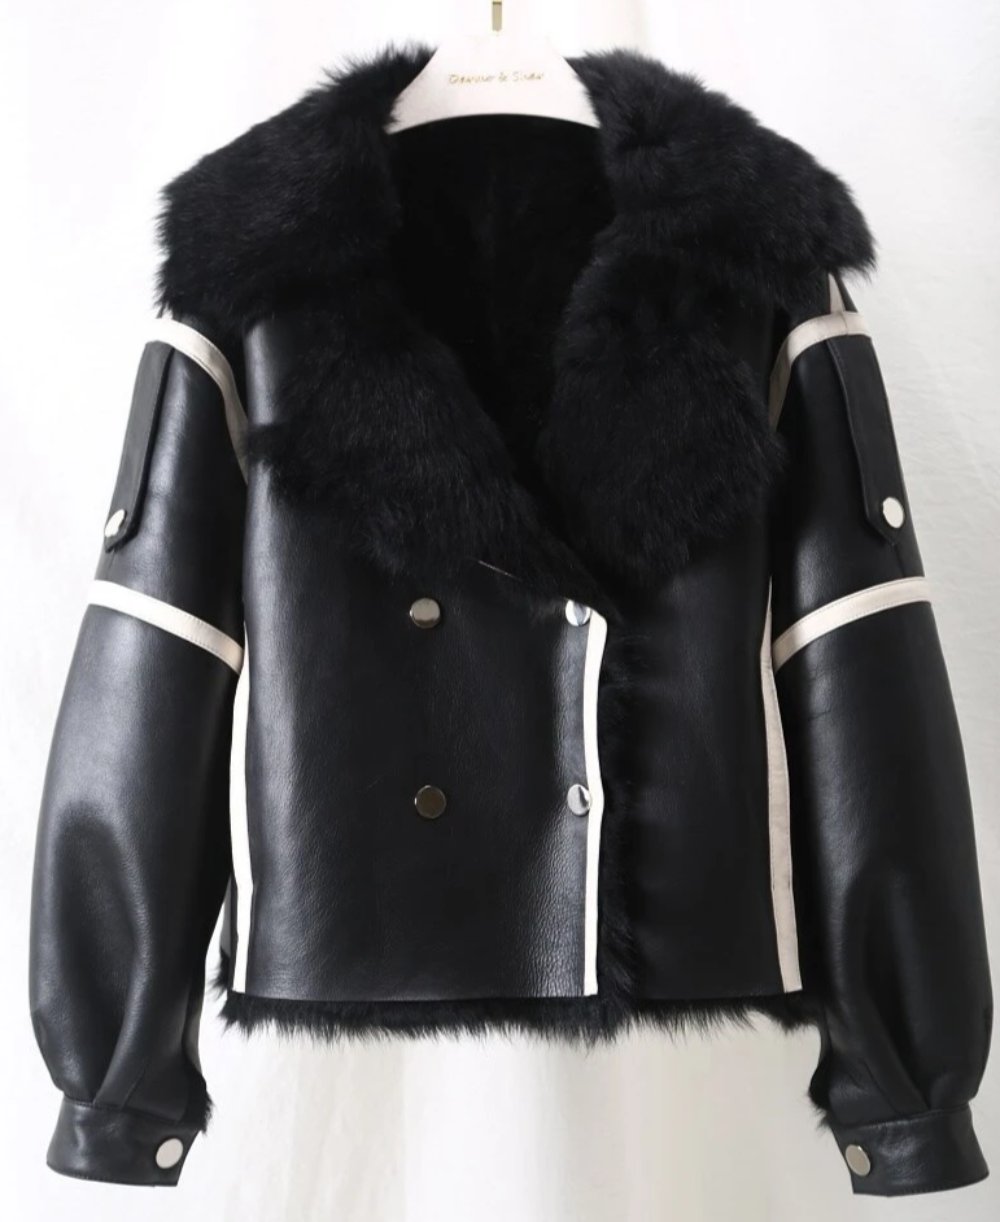 Women's Winter Casual Warm Genuine Leather Coat With Wool